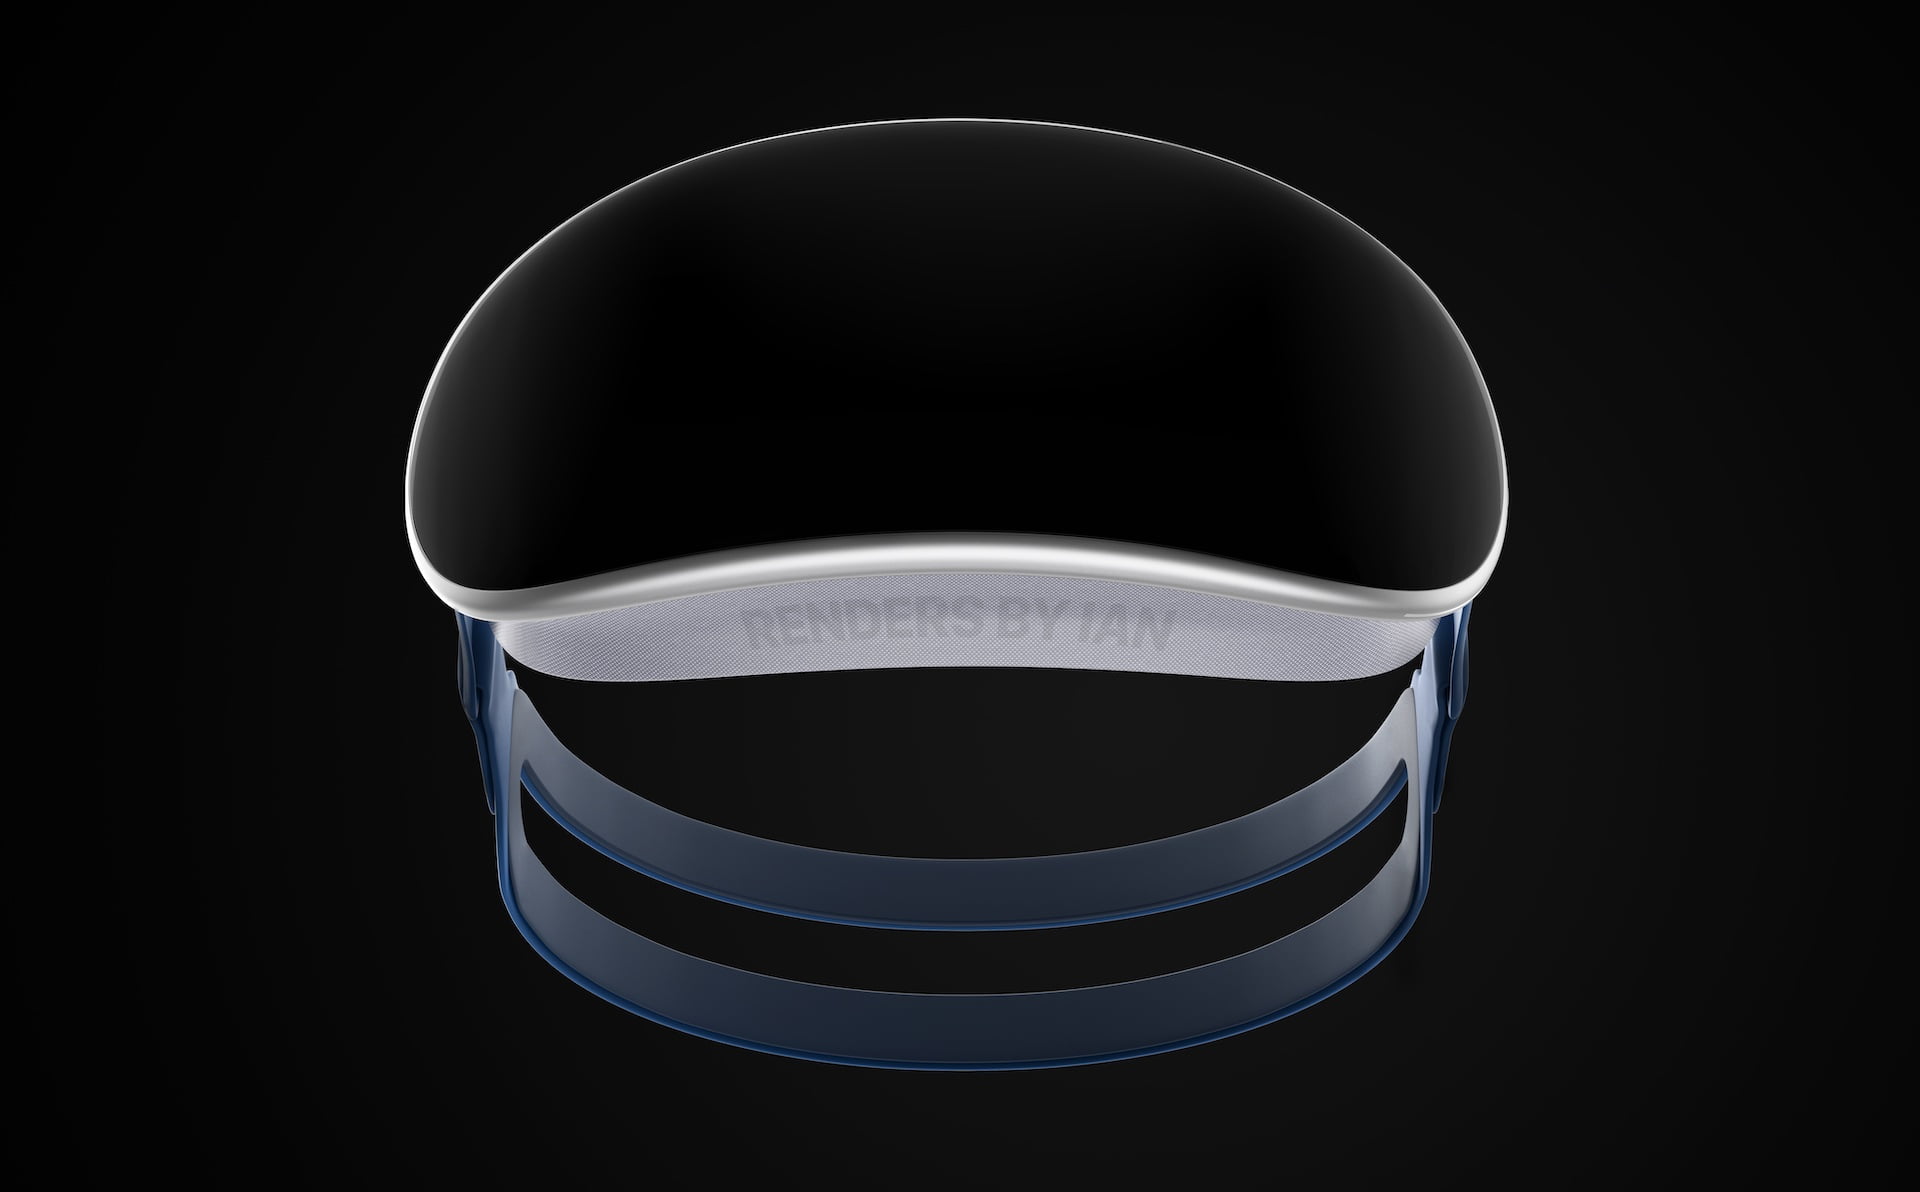 Apple’s mixed-reality headset could feature very expensive displays